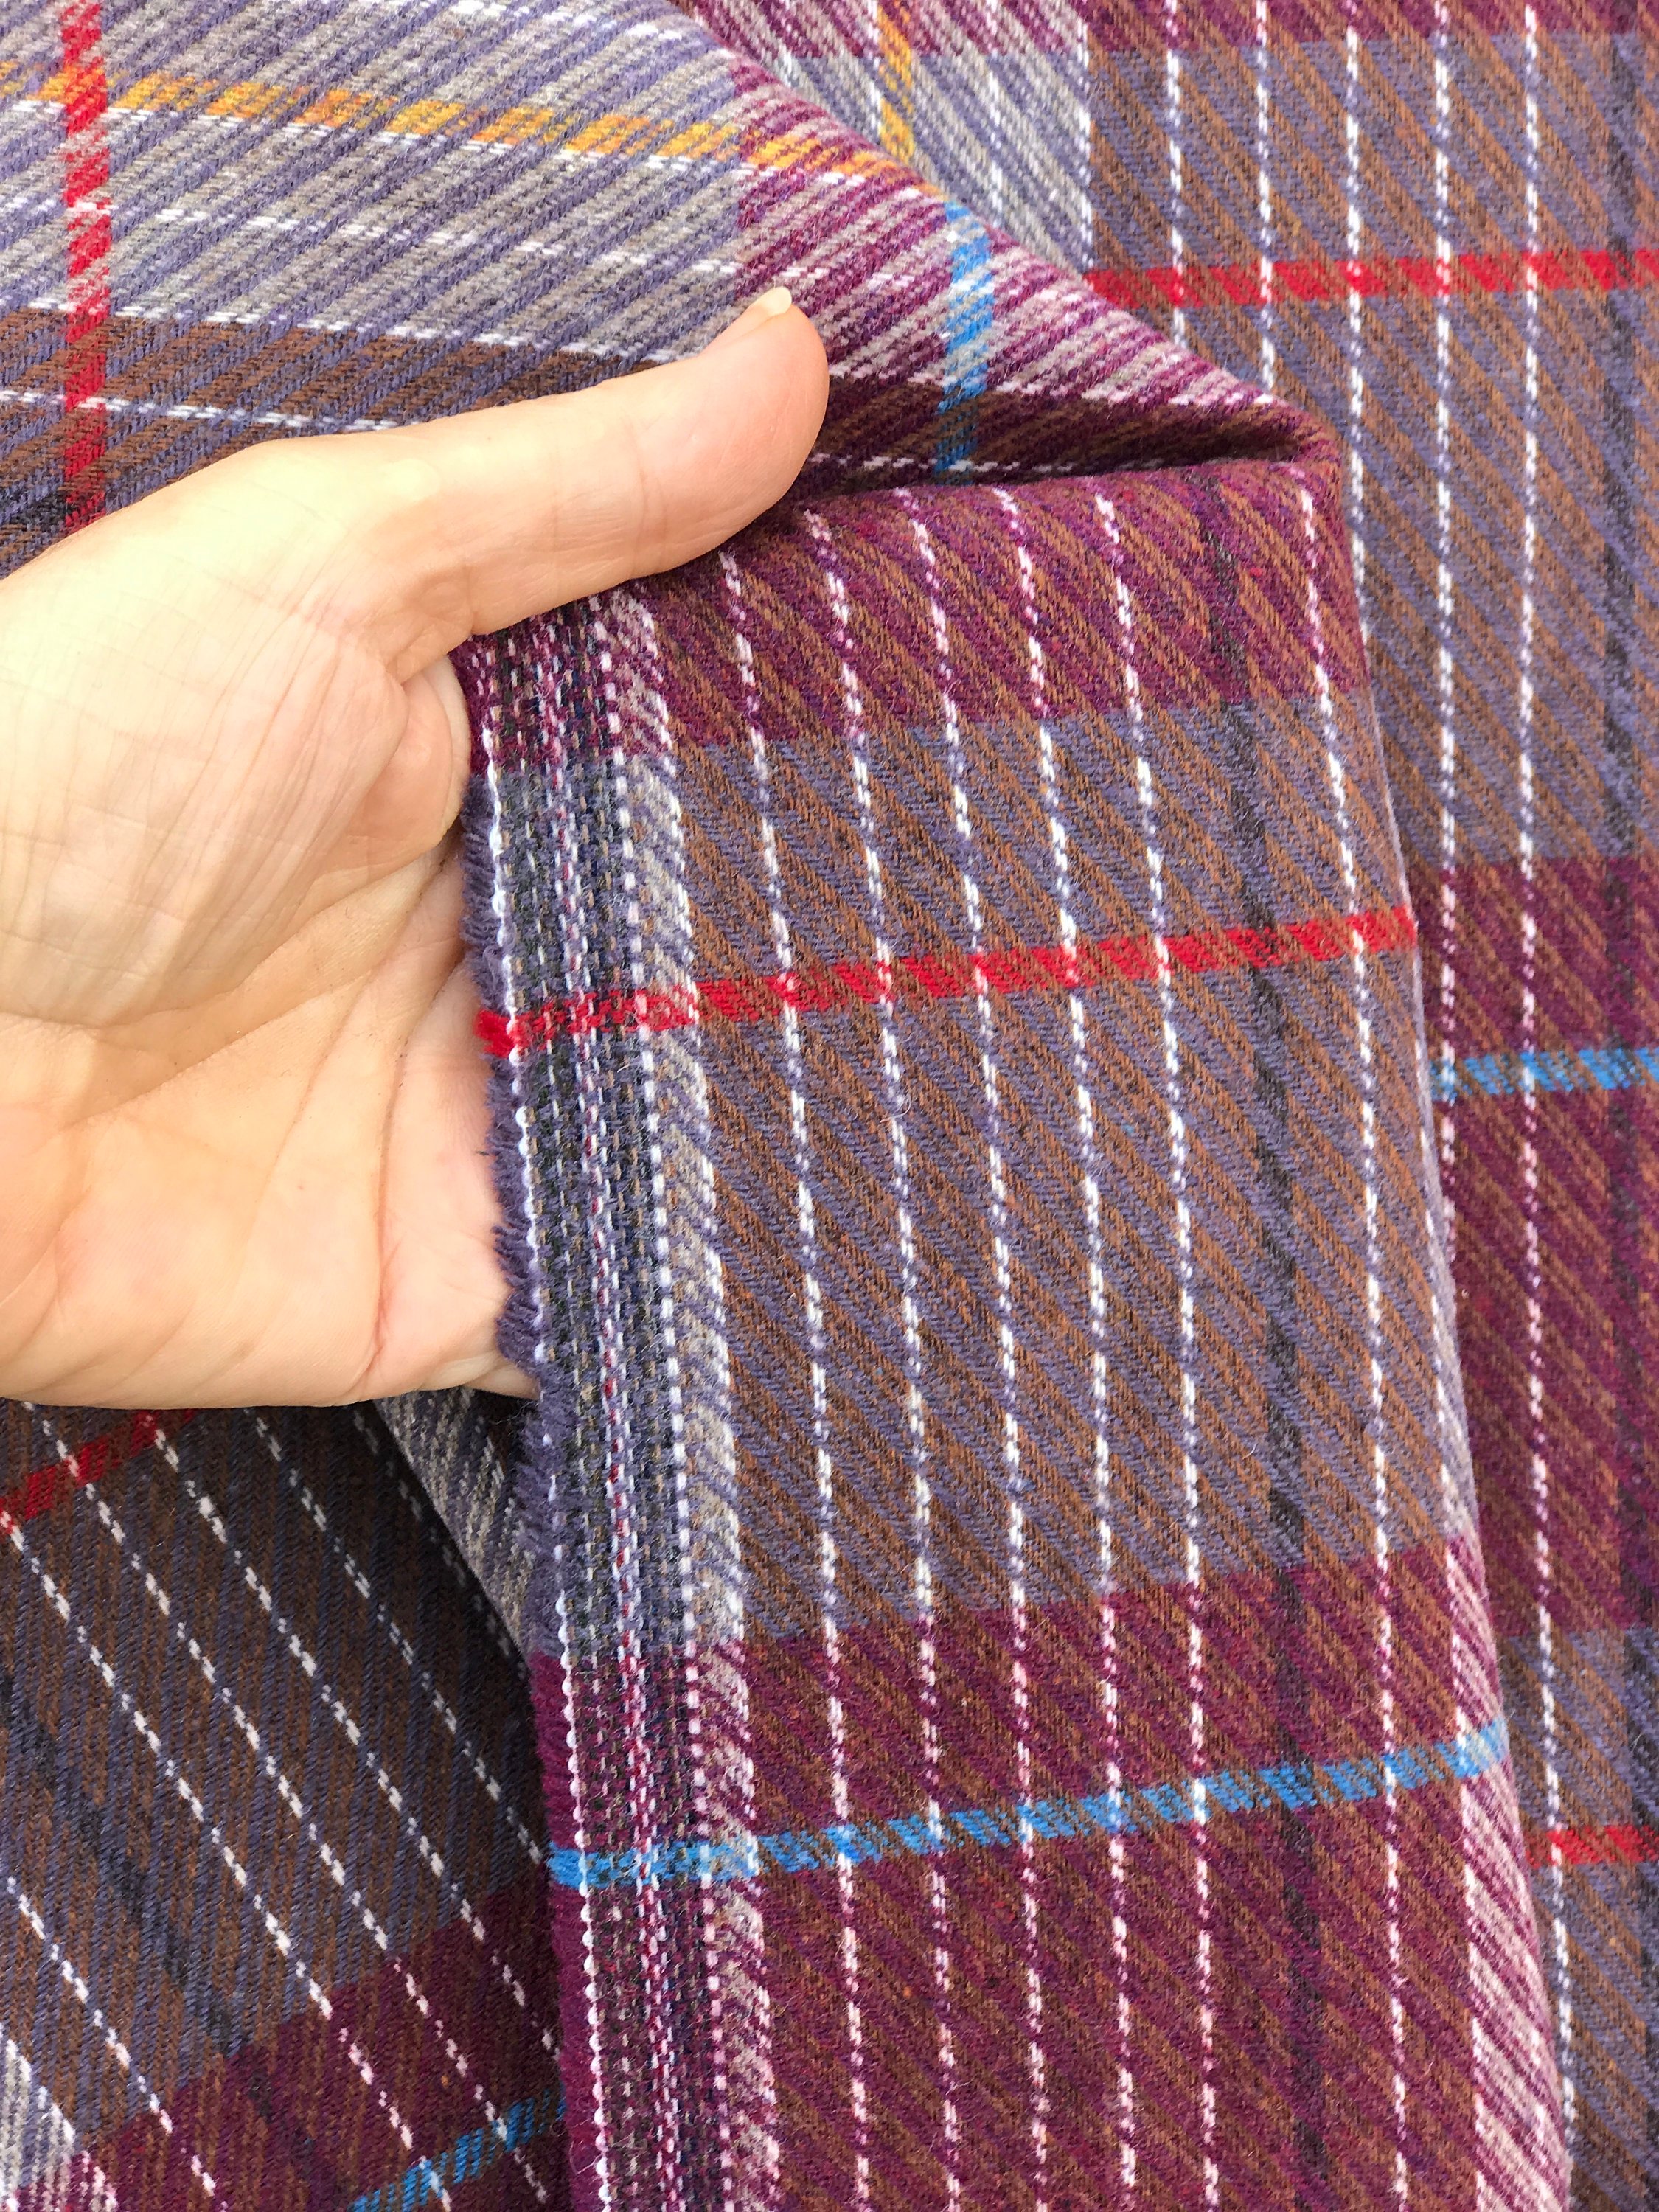 brown check tartan fabric wool mix 150cm 60 inches wide suiting, pants skirt fabric